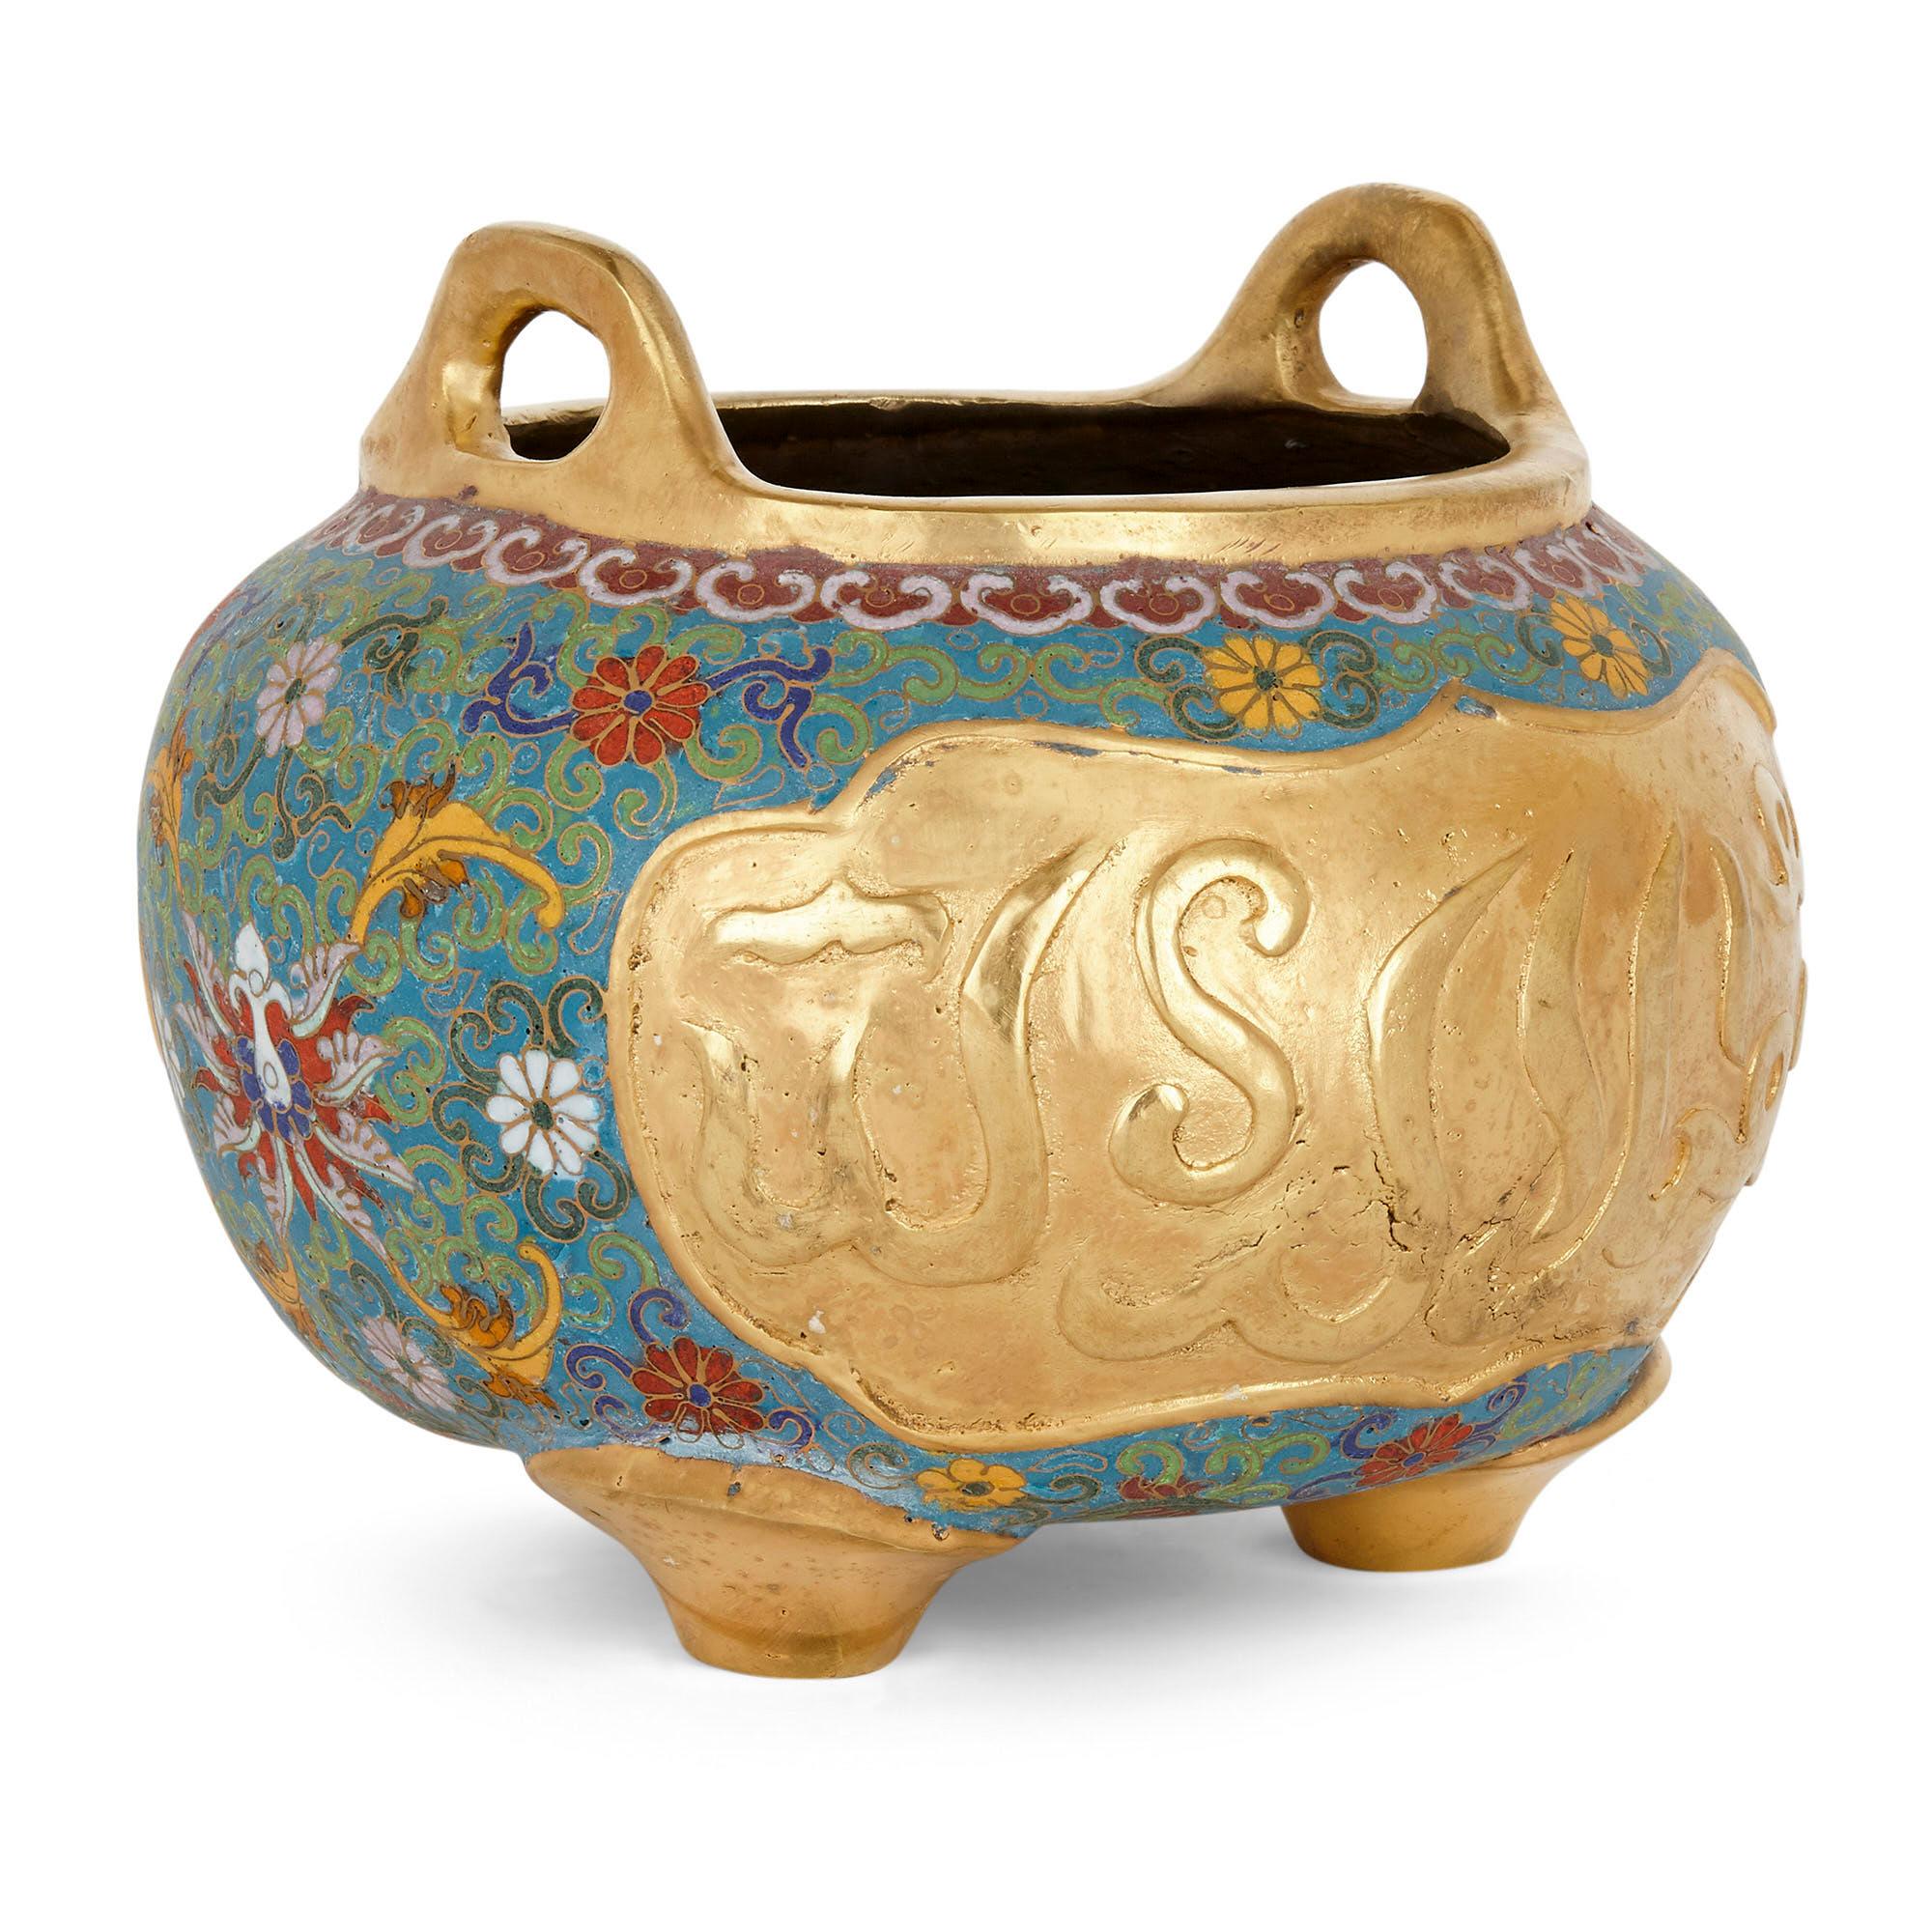 Chinese Export Chinese Ormolu and Cloisonné Enamel Vase for the Islamic Market For Sale